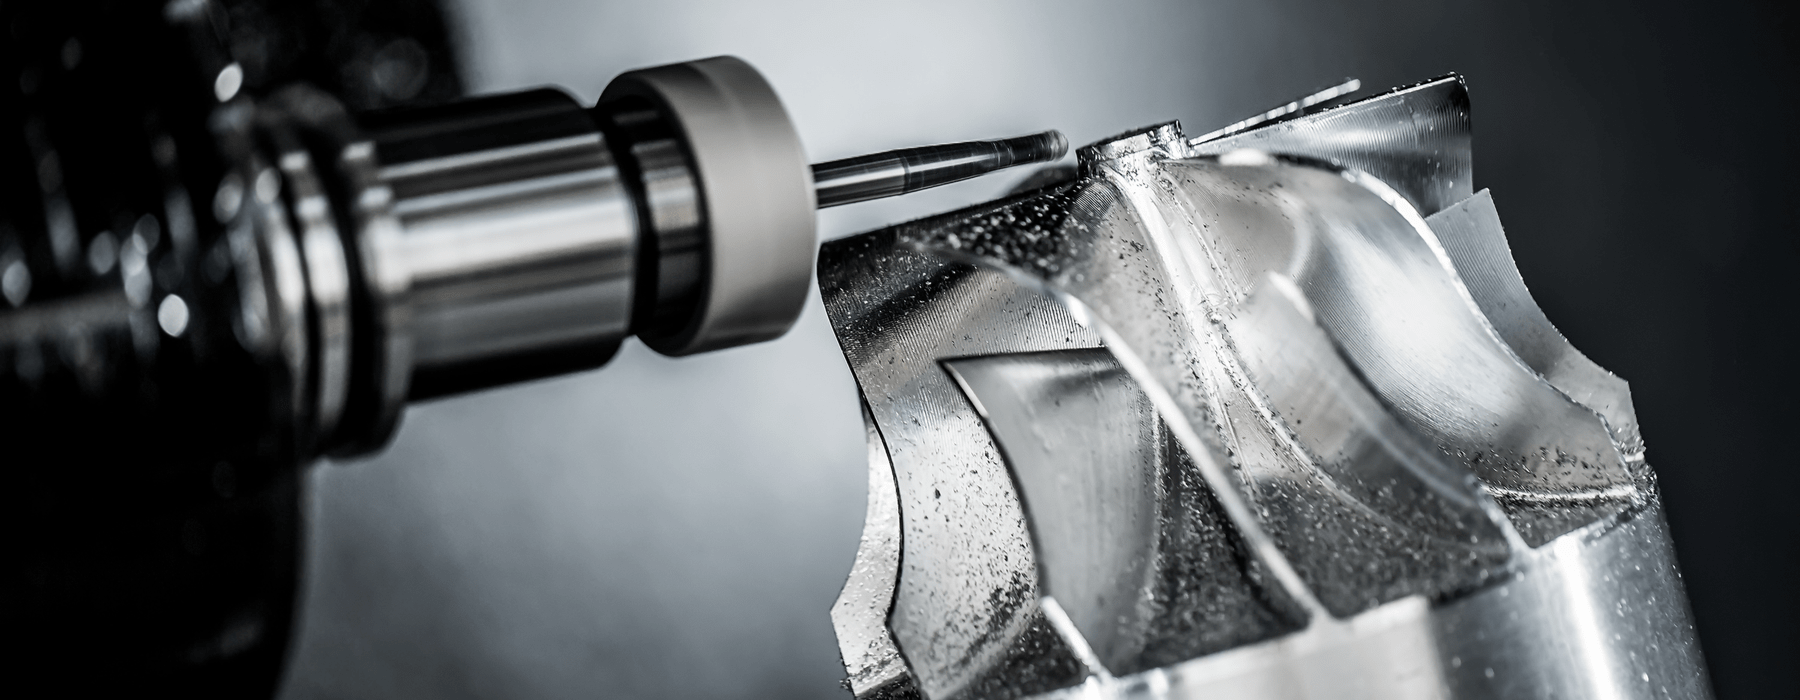 Understanding the Benefits and Industrial Applications of CNC Machining